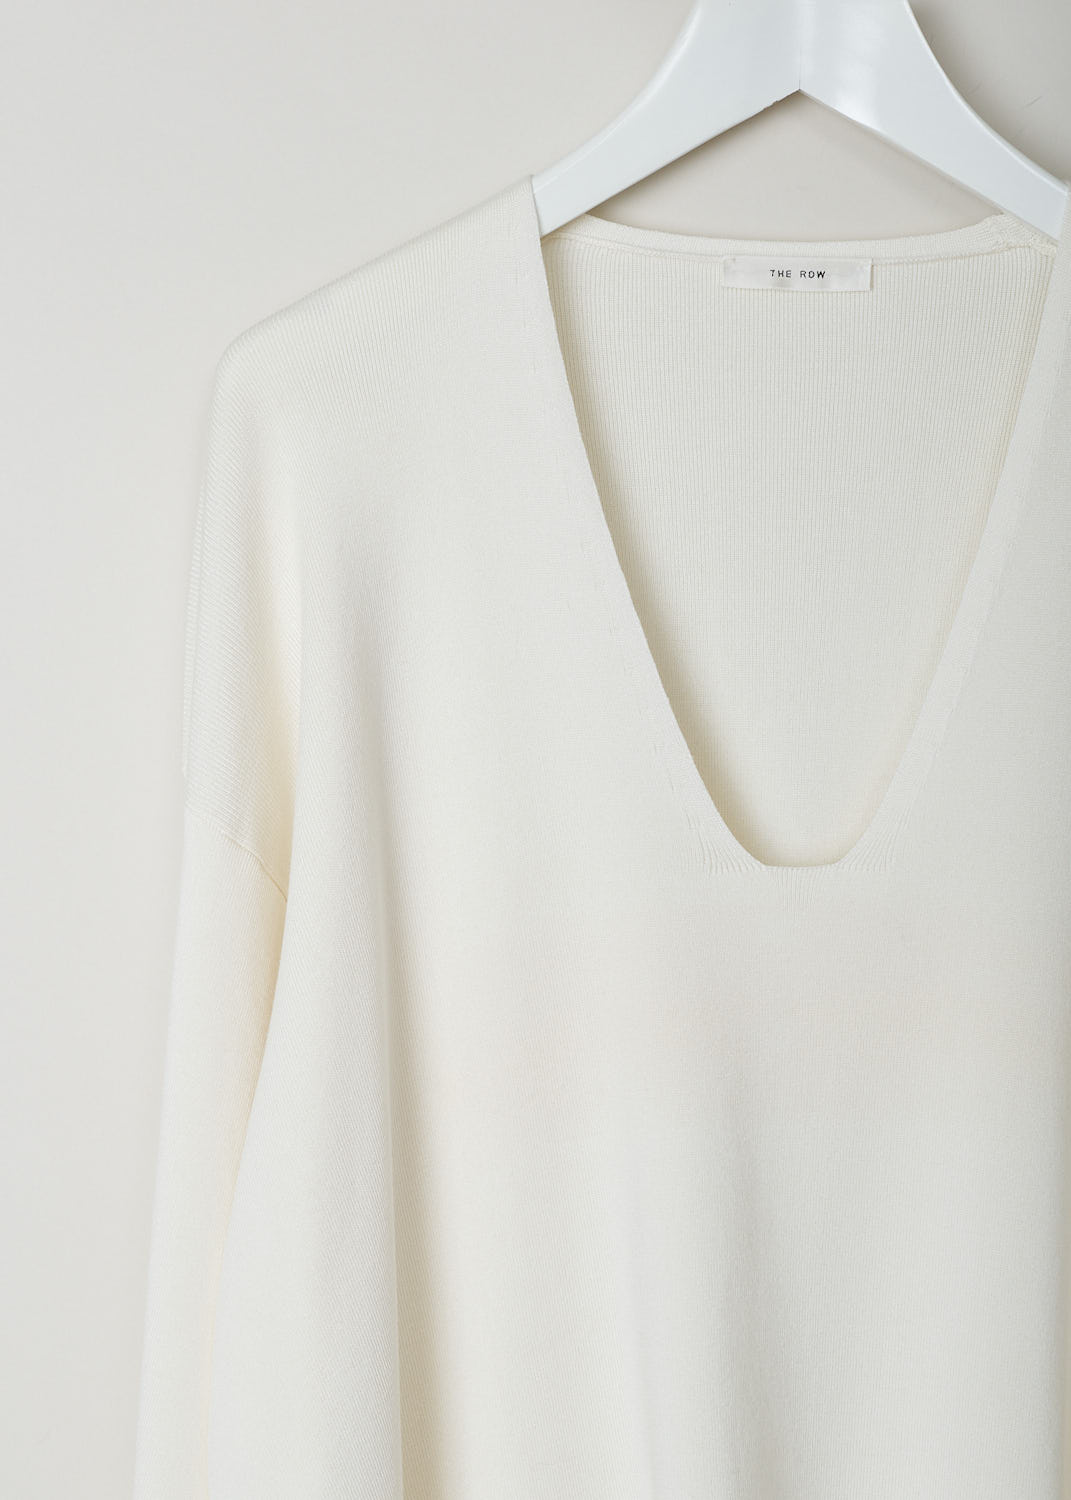 THE ROW, OFF-WHITE SWEATER, LESLI_TOP_3856Y252_IVORY, White, Detail, This silk-blend top in off-white has a deep, rounded off V-neckline and slightly flared sleeves. The top has a broad hemline with small slits. The top has a wider silhouette.
